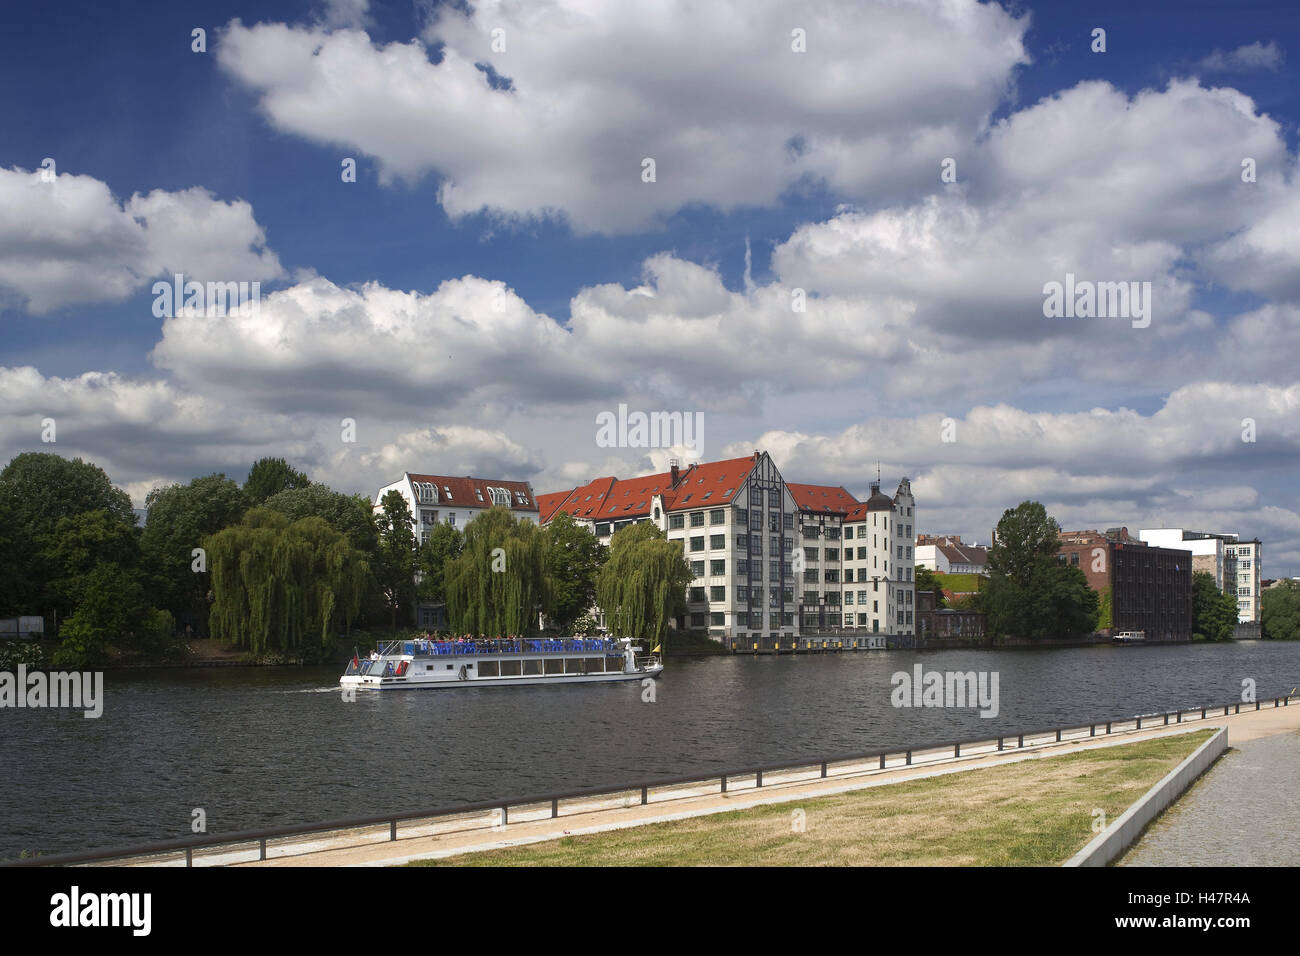 Germany, Berlin, cross mountain, the Spree, town, architecture, building, river, ship, ship traffic, tourism, cumulus clouds, trees, shores, residential houses, Stock Photo